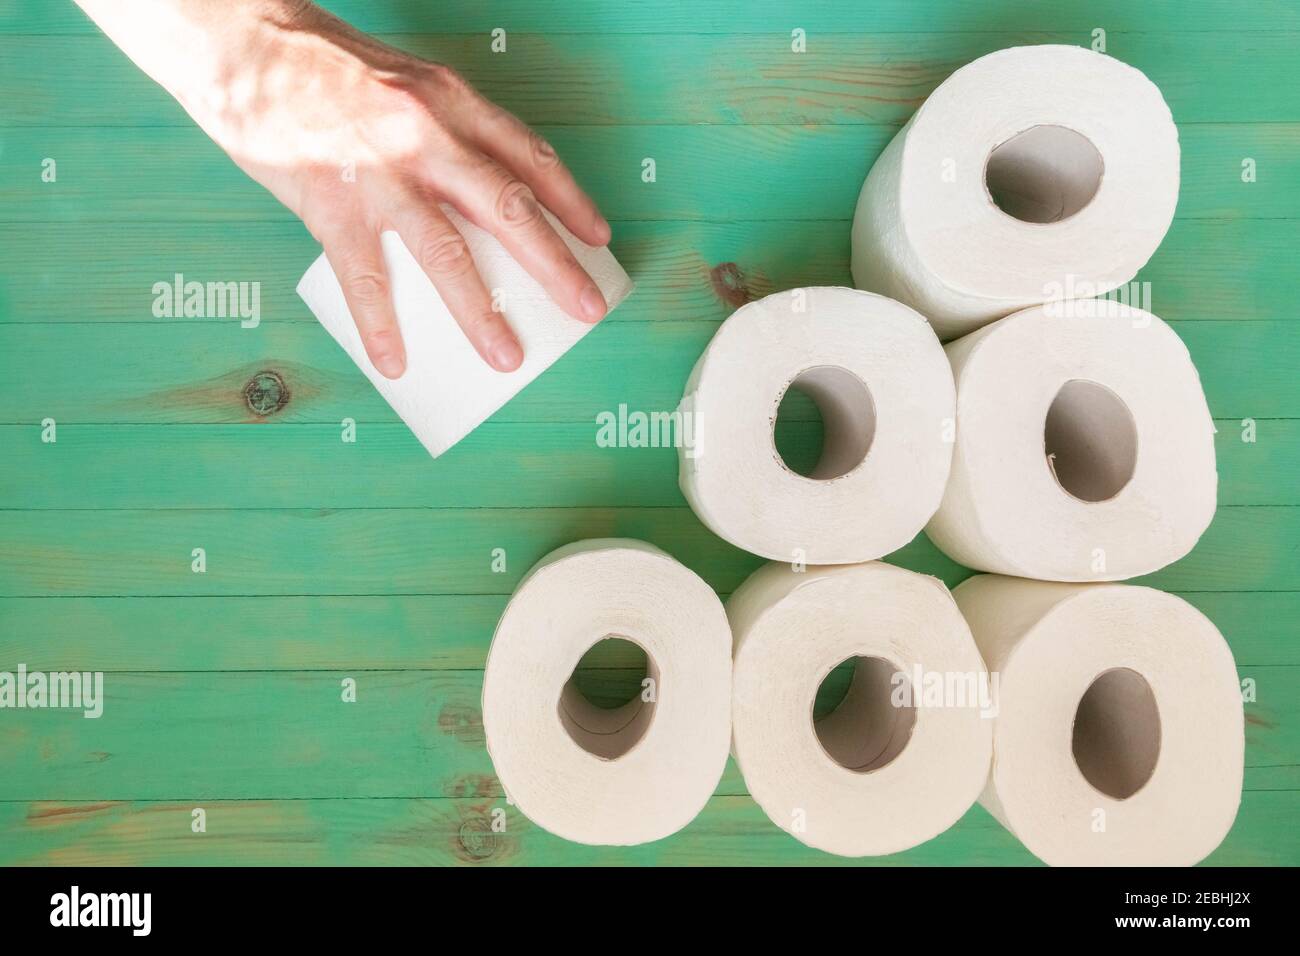 Senior hand outstretched to take toilet paper roll from. Toilet paper rolls hoarding at home of hoarder amidst panic buying for coronavirus outbreak s Stock Photo